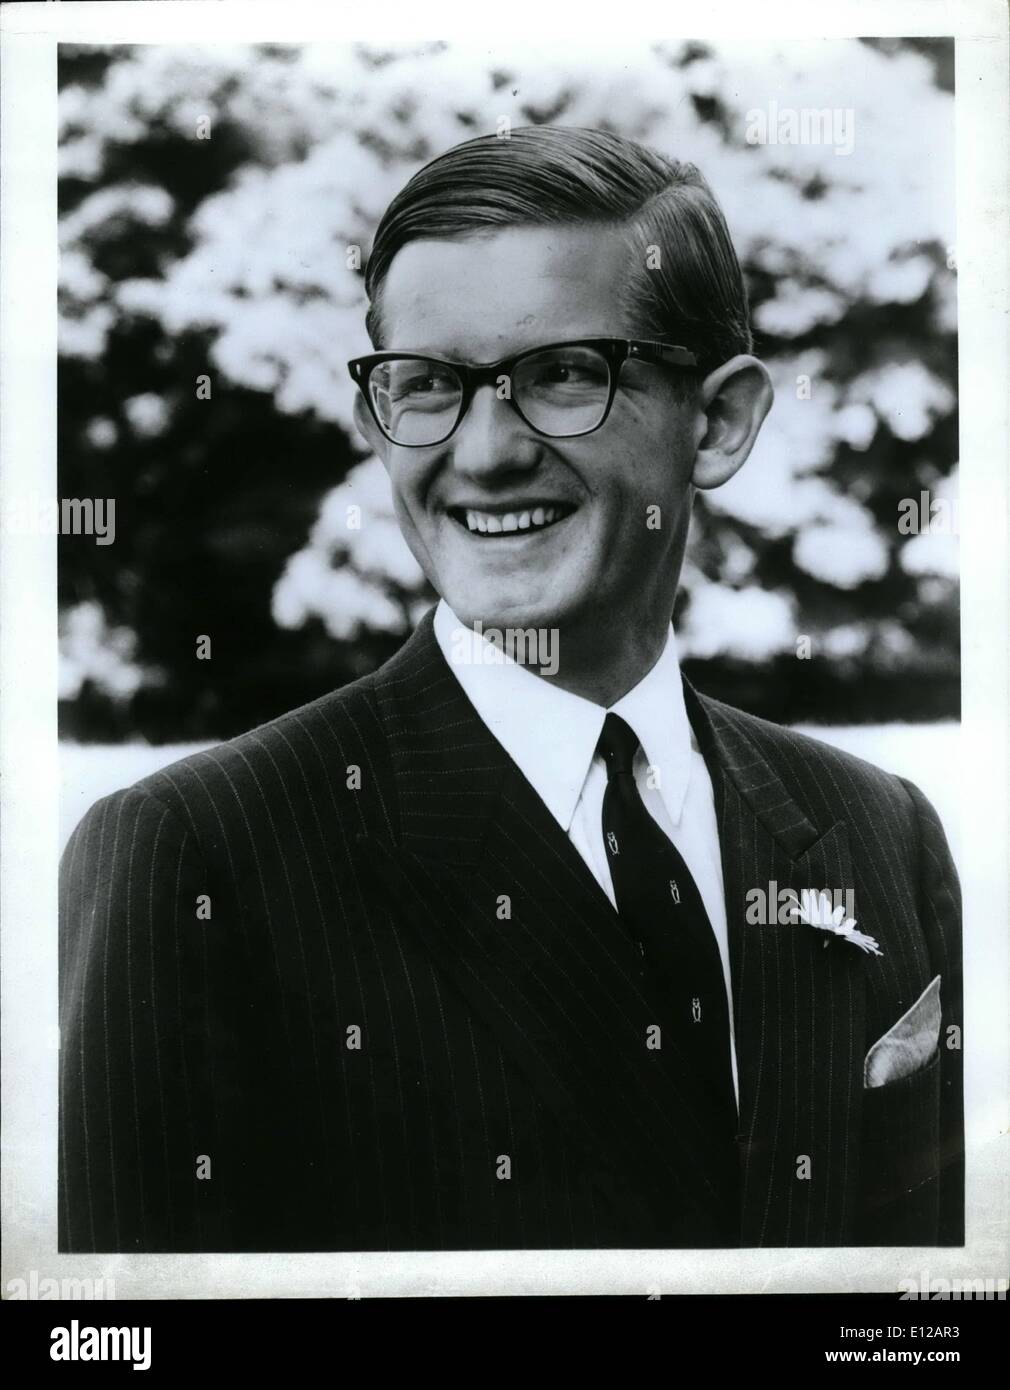 Dec. 09, 2011 - Wedding of her Royal Highness Princess Margriet: The wedding of Her Royal Highness Princess Margriet of the Netherlands and Mr. Pieter van Vollenhoven will take place on January 10, 1967, at the Hague, the Netherlands. Photo shows Mr. Pieter van Vollenhoven. Stock Photo